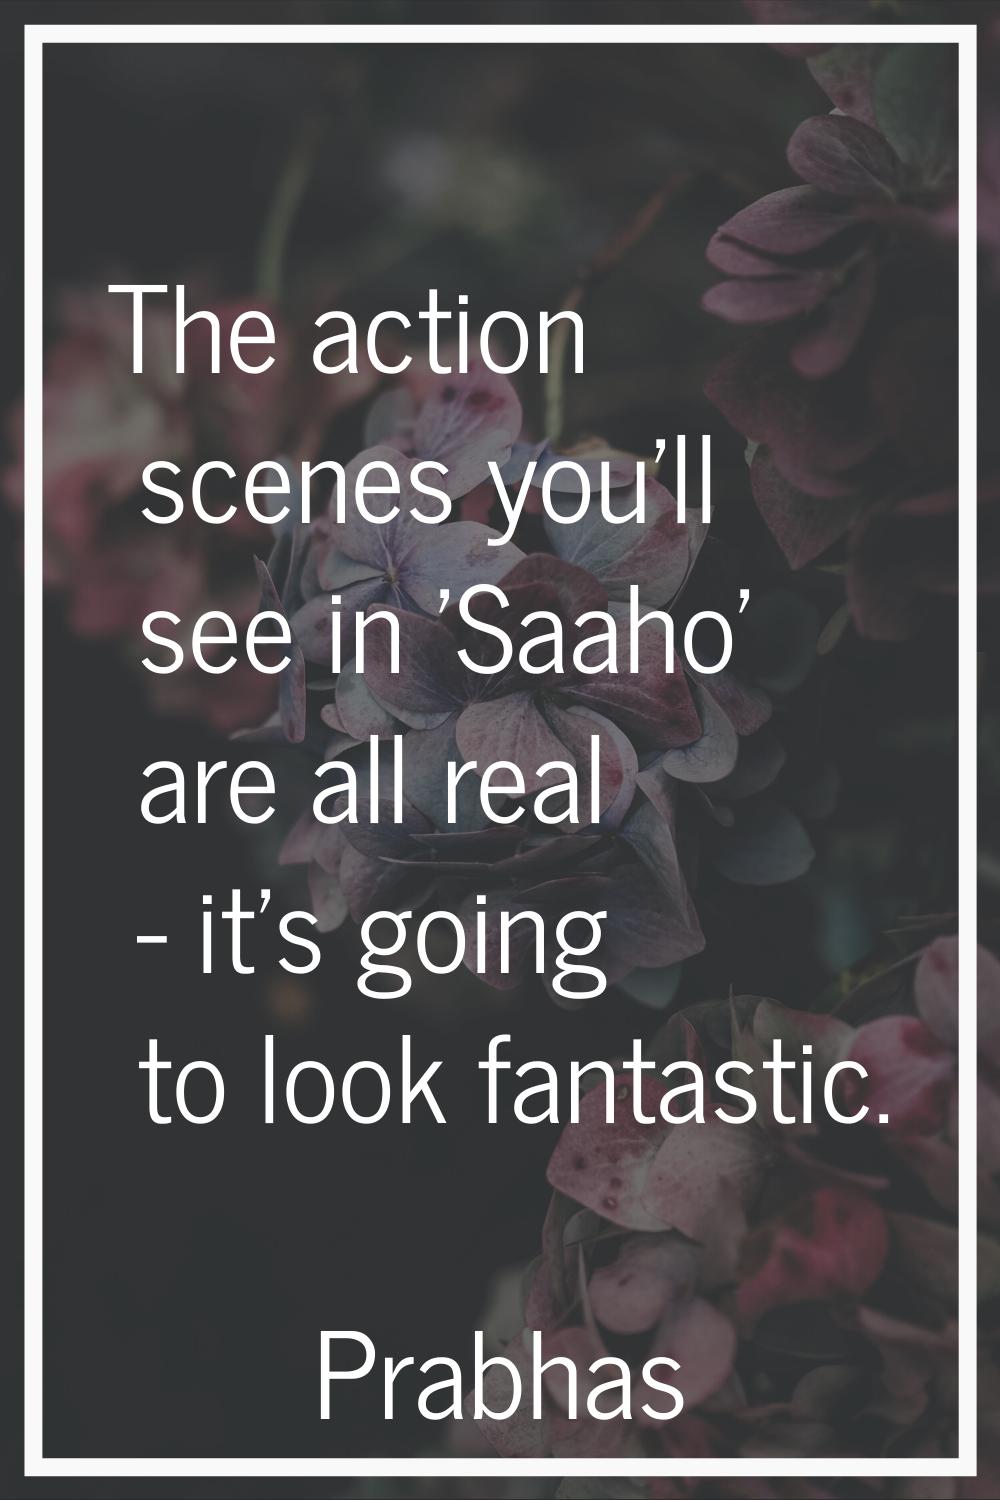 The action scenes you'll see in 'Saaho' are all real - it's going to look fantastic.